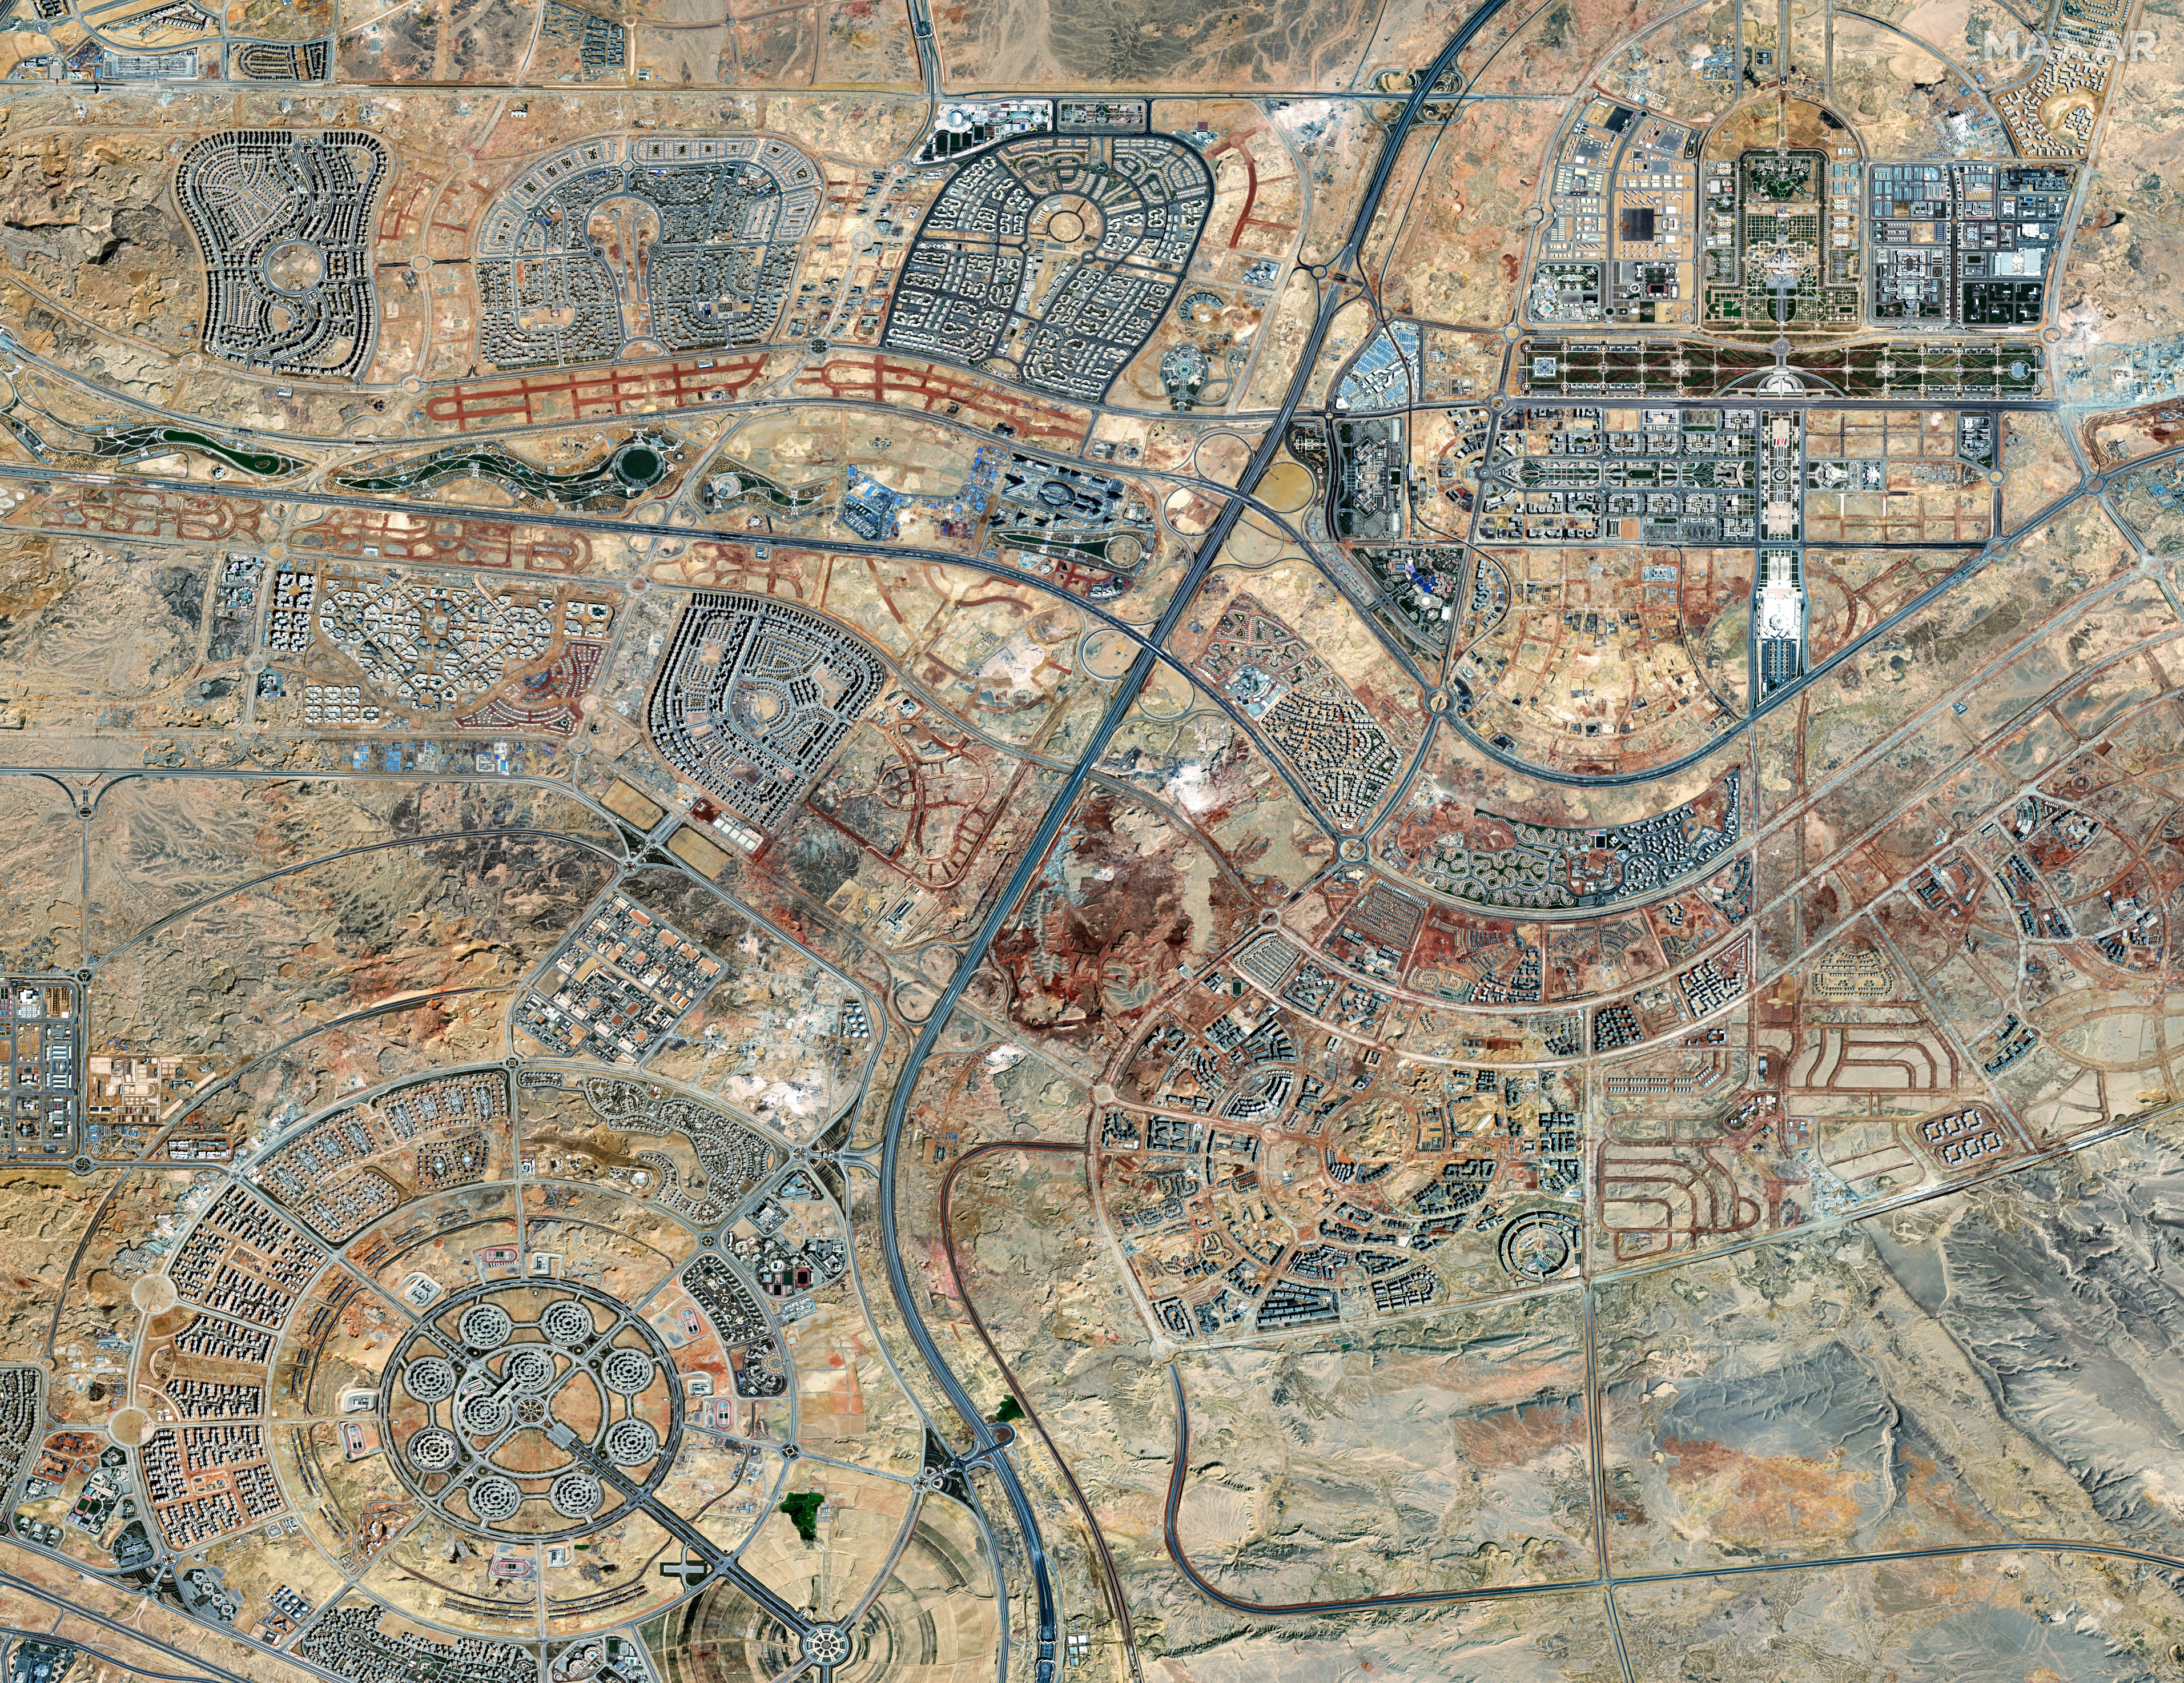 Satellite image shows construction of Egypt’s new capital